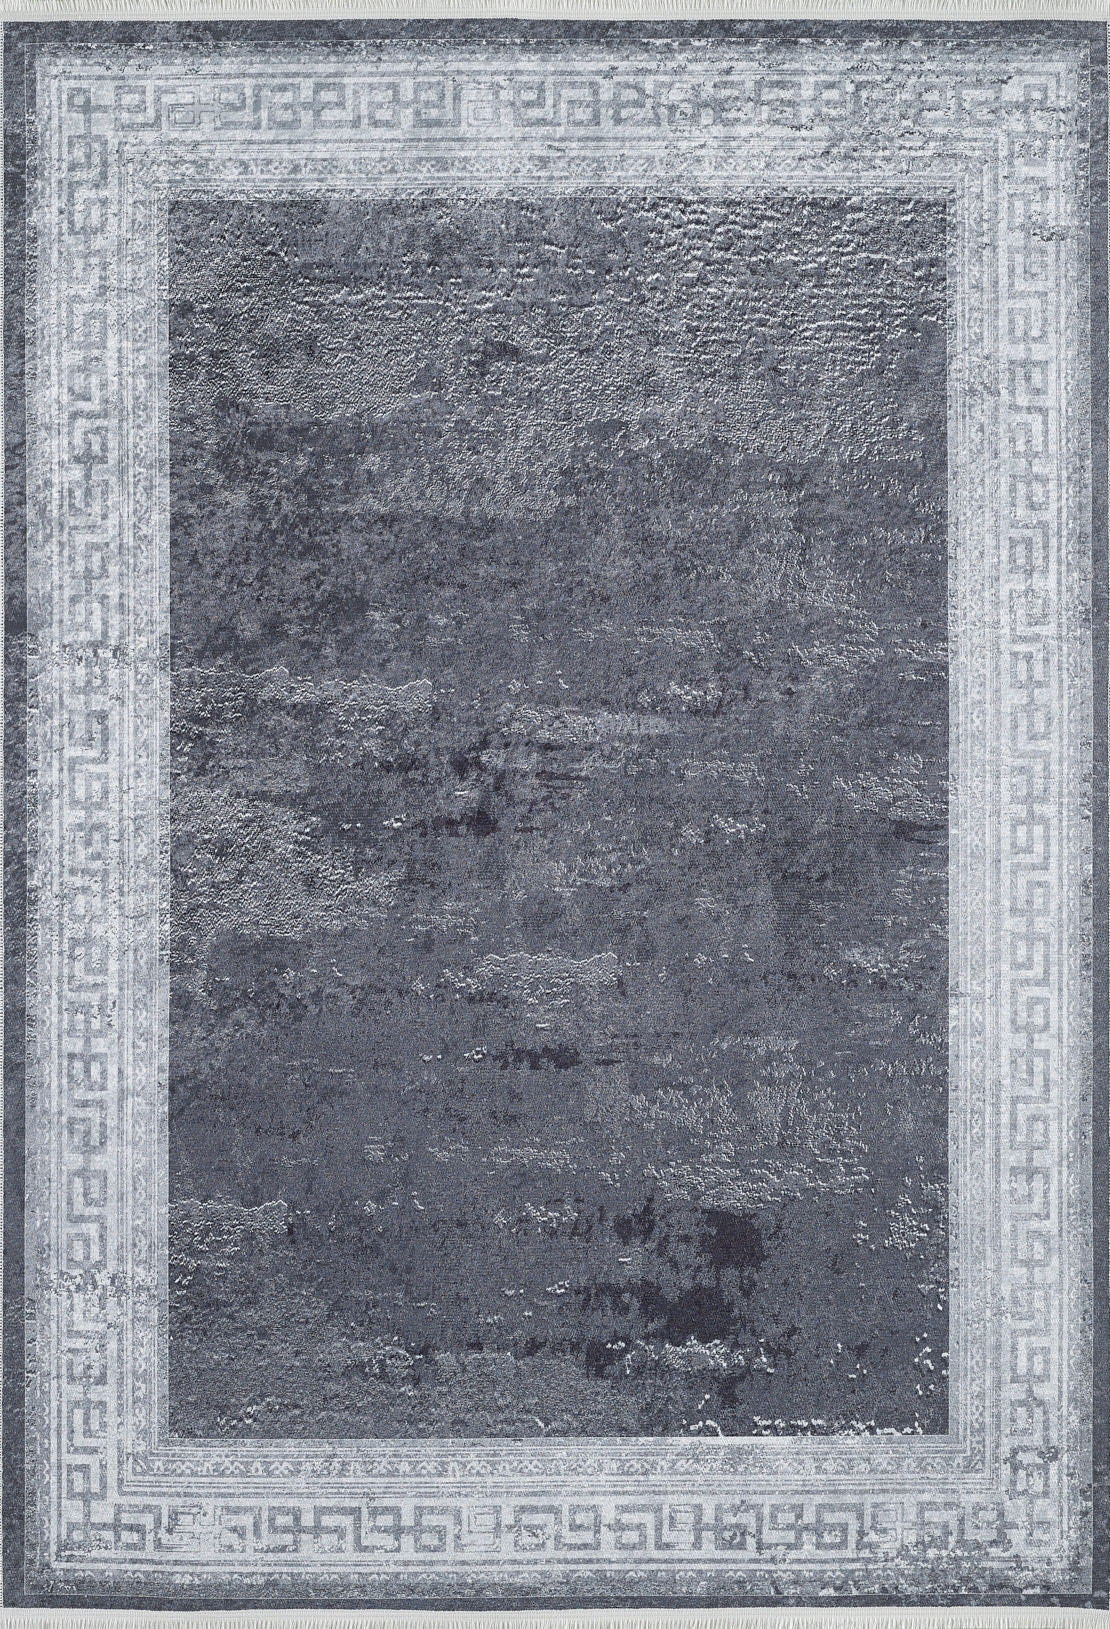 machine-washable-area-rug-Bordered-Modern-Collection-Gray-Anthracite-JR1768